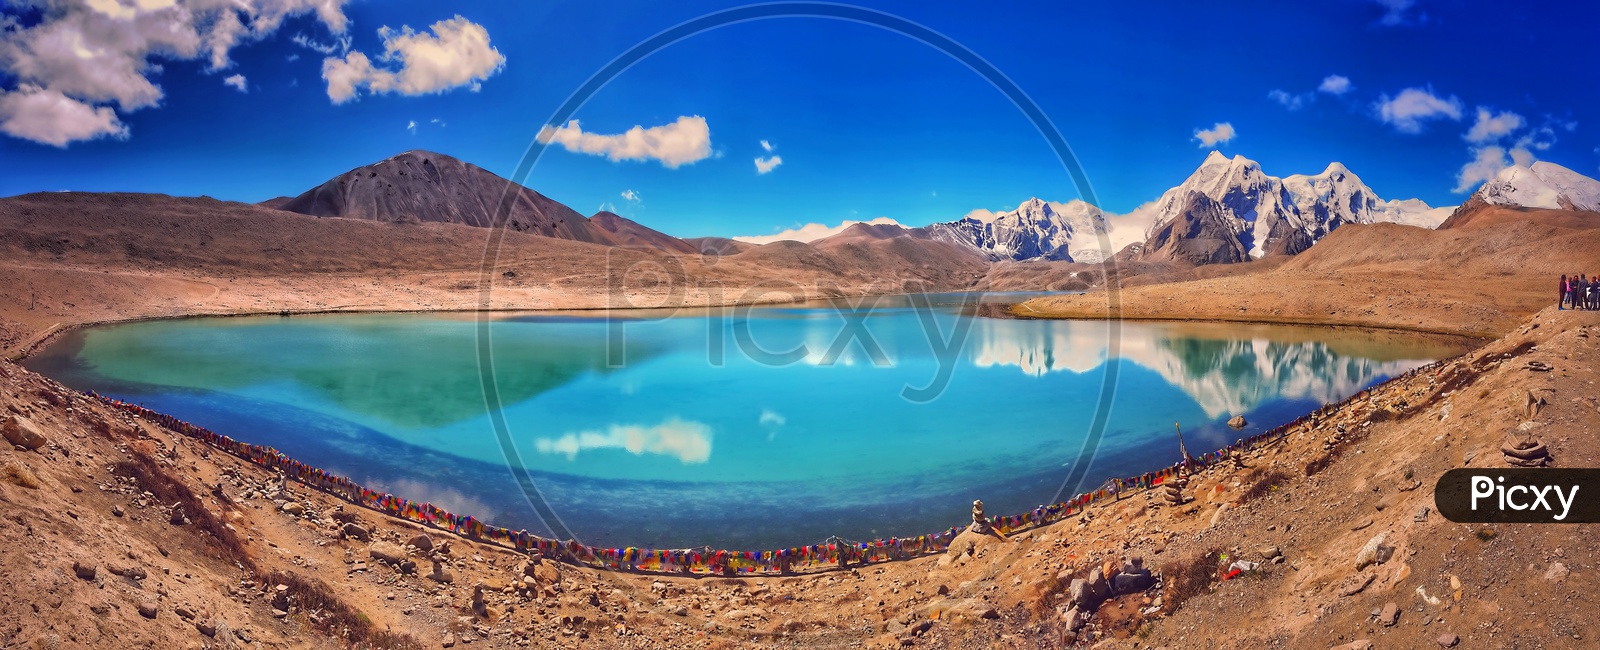 October, 2019, Gurudongmar Lake,North Sikkim, India. Tourist At The Bank Of The Gurudongmar Lake During The Day Time. The Panoramic View Of The Holy Lake Which Is One Of The Highest Fresh Water Lakes Of Asia. Sikkim, India.